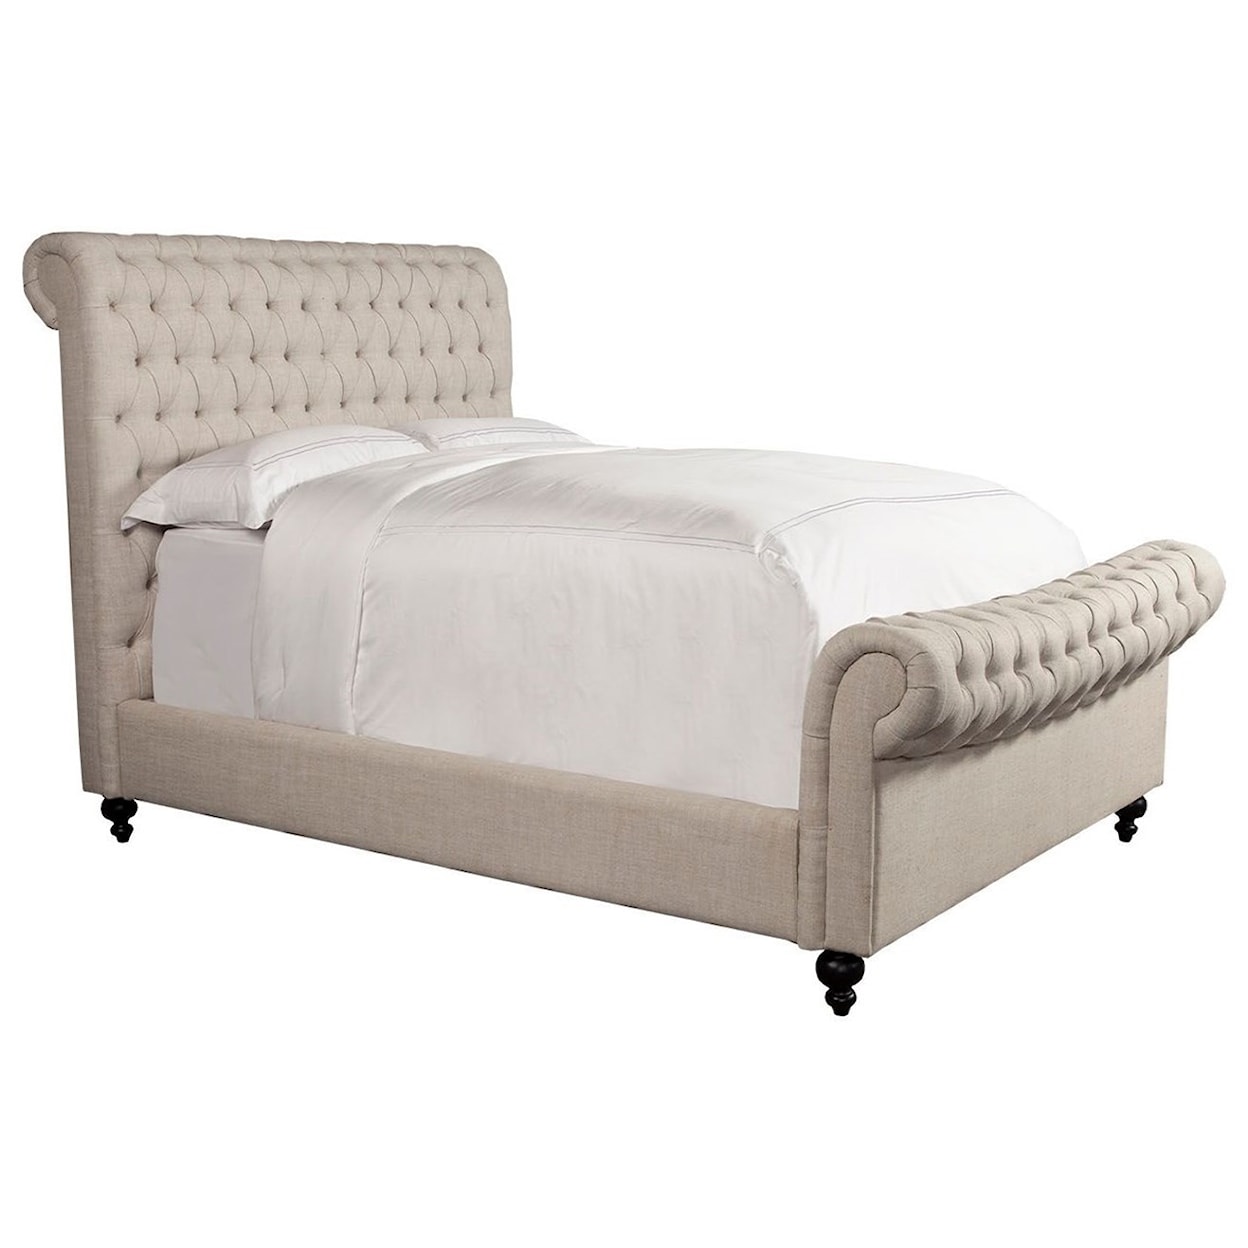 PH Jackie Queen Upholstered Sleigh Bed